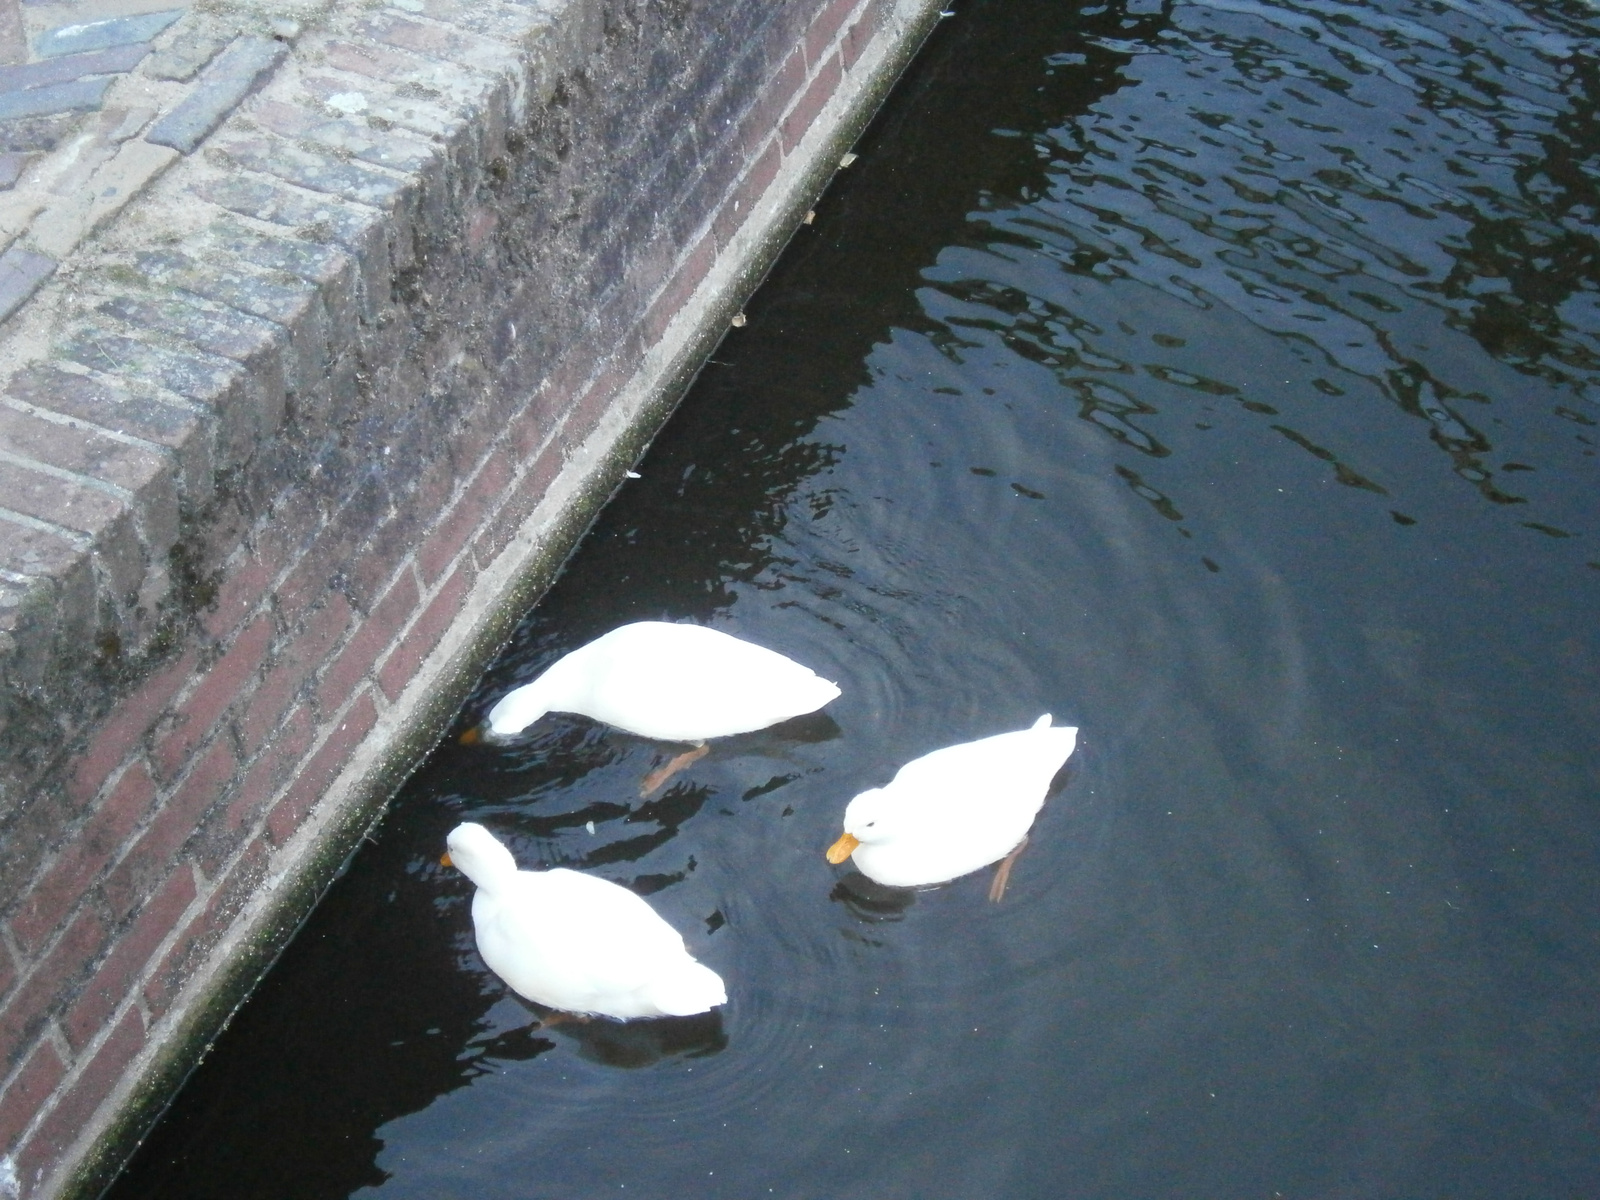 101 Day 7 bright ducks in the canal of Volendam